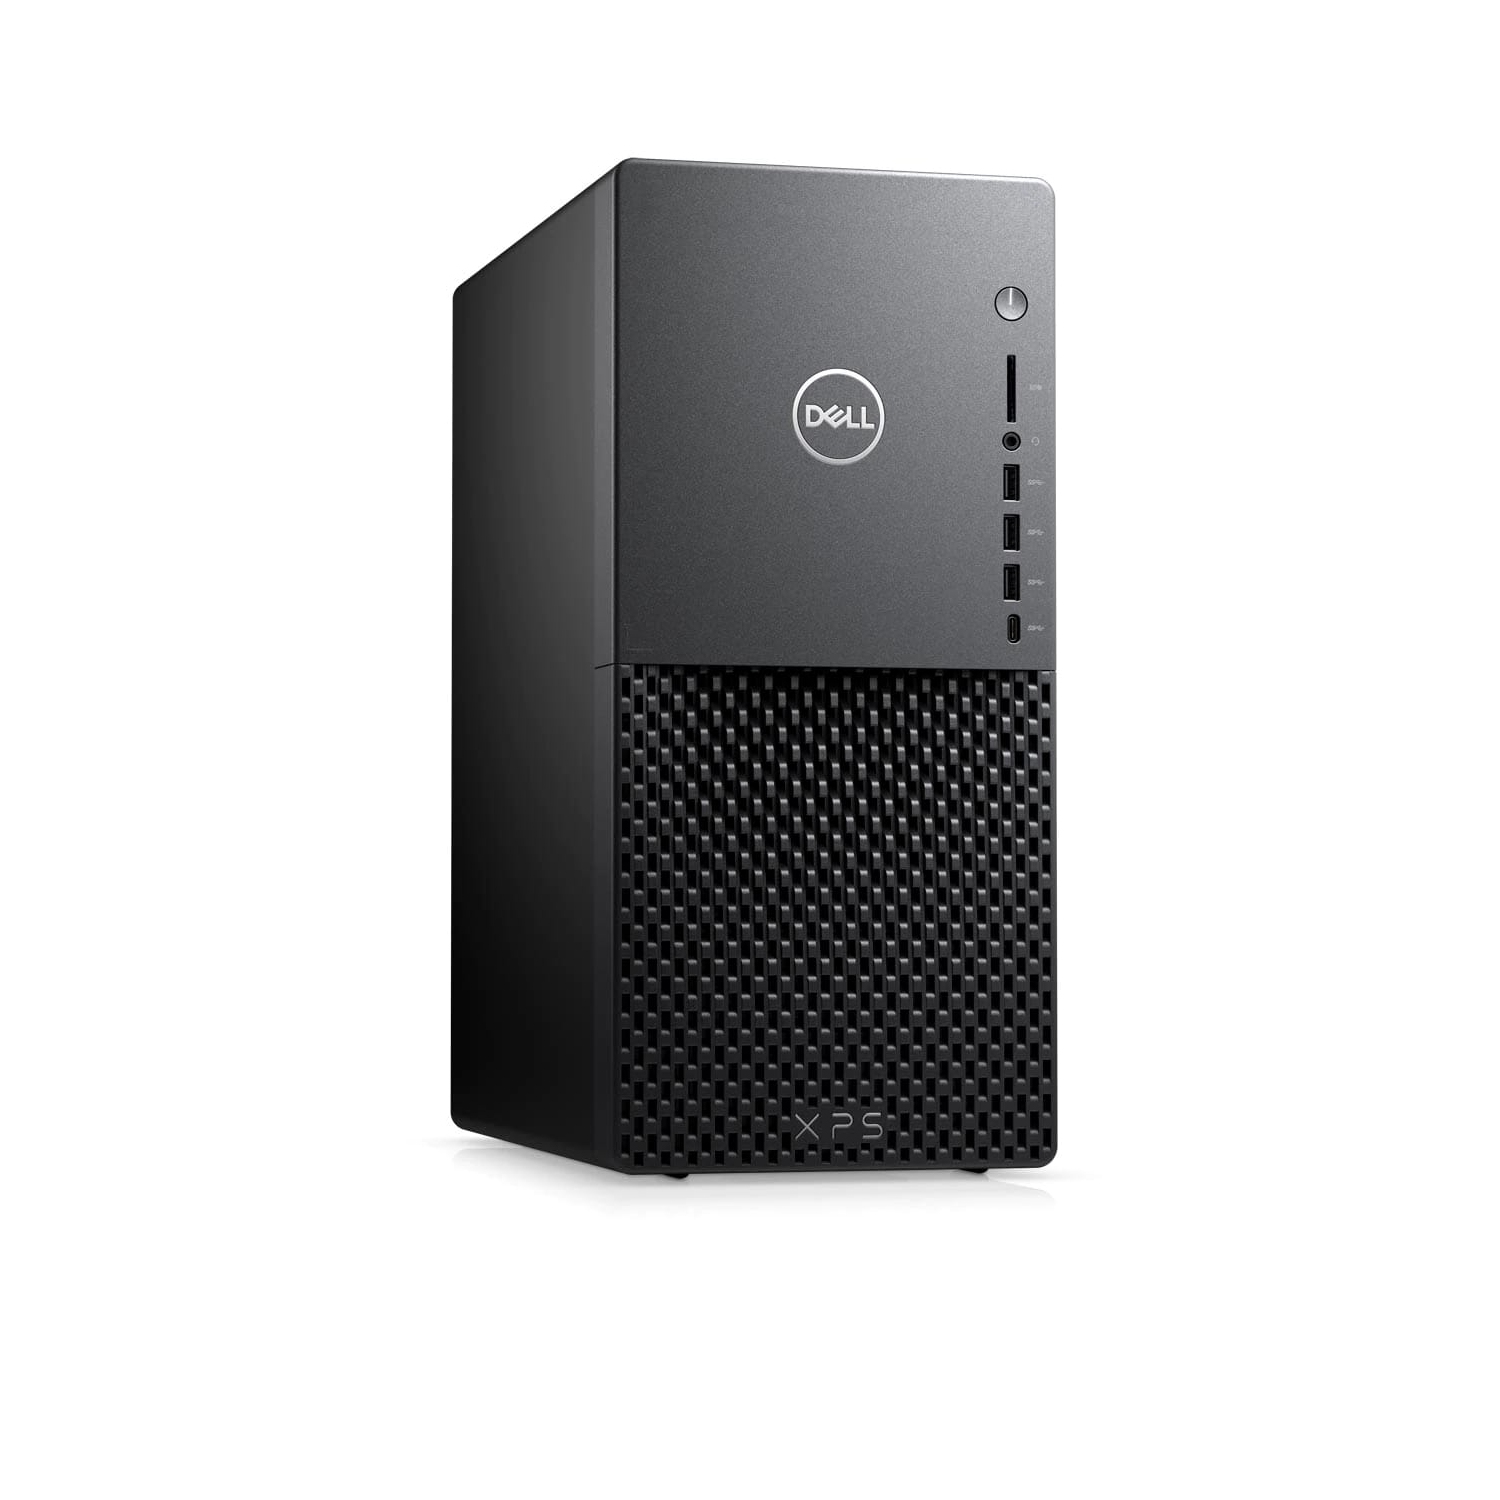 Refurbished (Excellent) - Dell XPS 8940 Desktop (2020) | Core i7 - 1TB SSD - 16GB RAM - 3060 Ti | 8 Cores @ 4.9 GHz - 11th Gen CPU Certified Refurbished